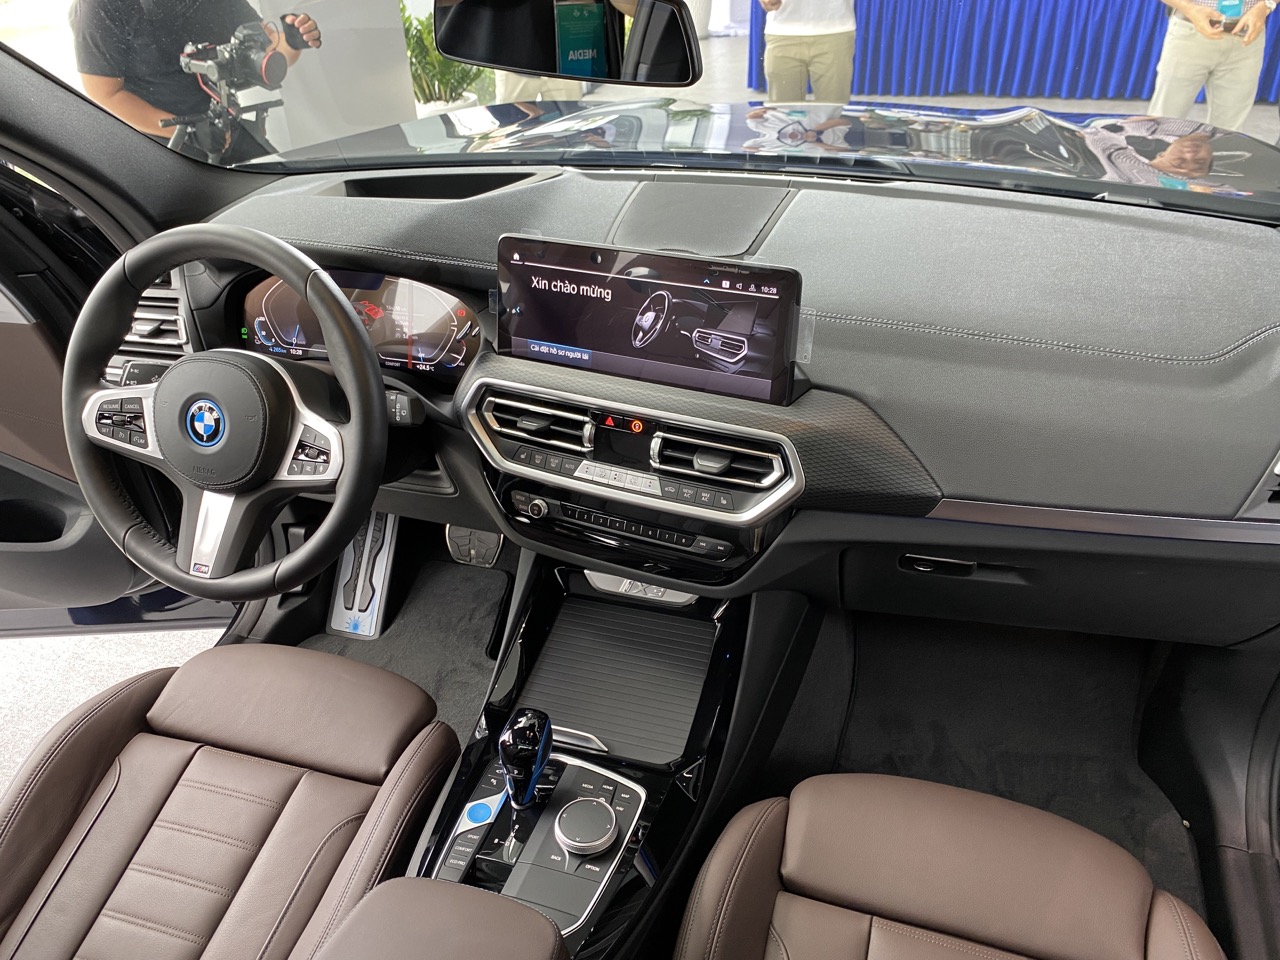 Electric car BMW iX3 and i4 officially launched in Vietnam BMW iX3 4.jpeg